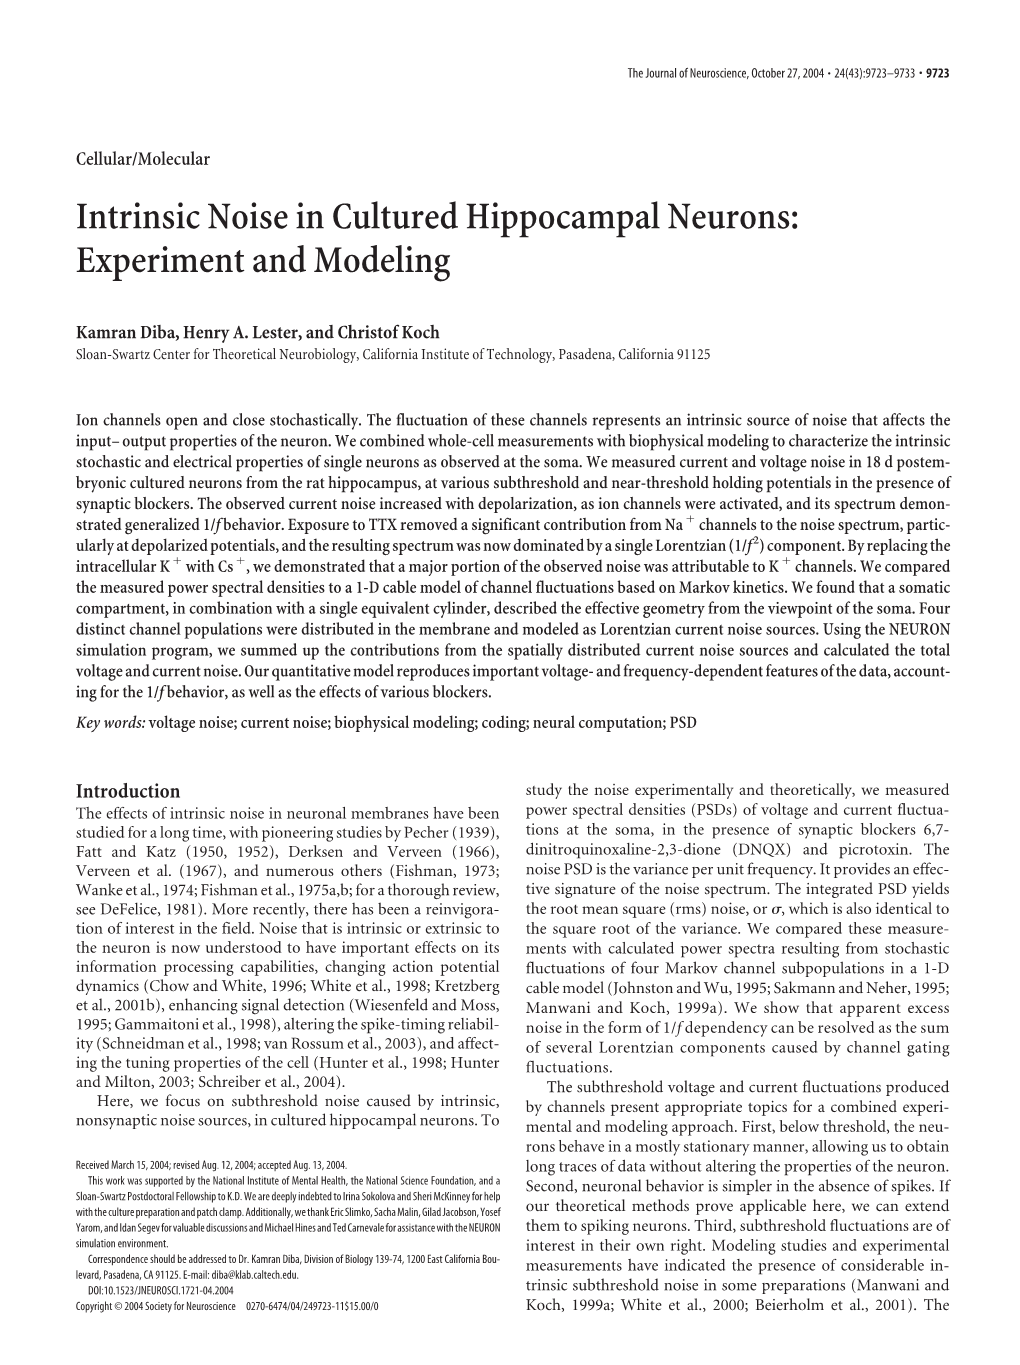 Intrinsic Noise in Cultured Hippocampal Neurons: Experiment and Modeling